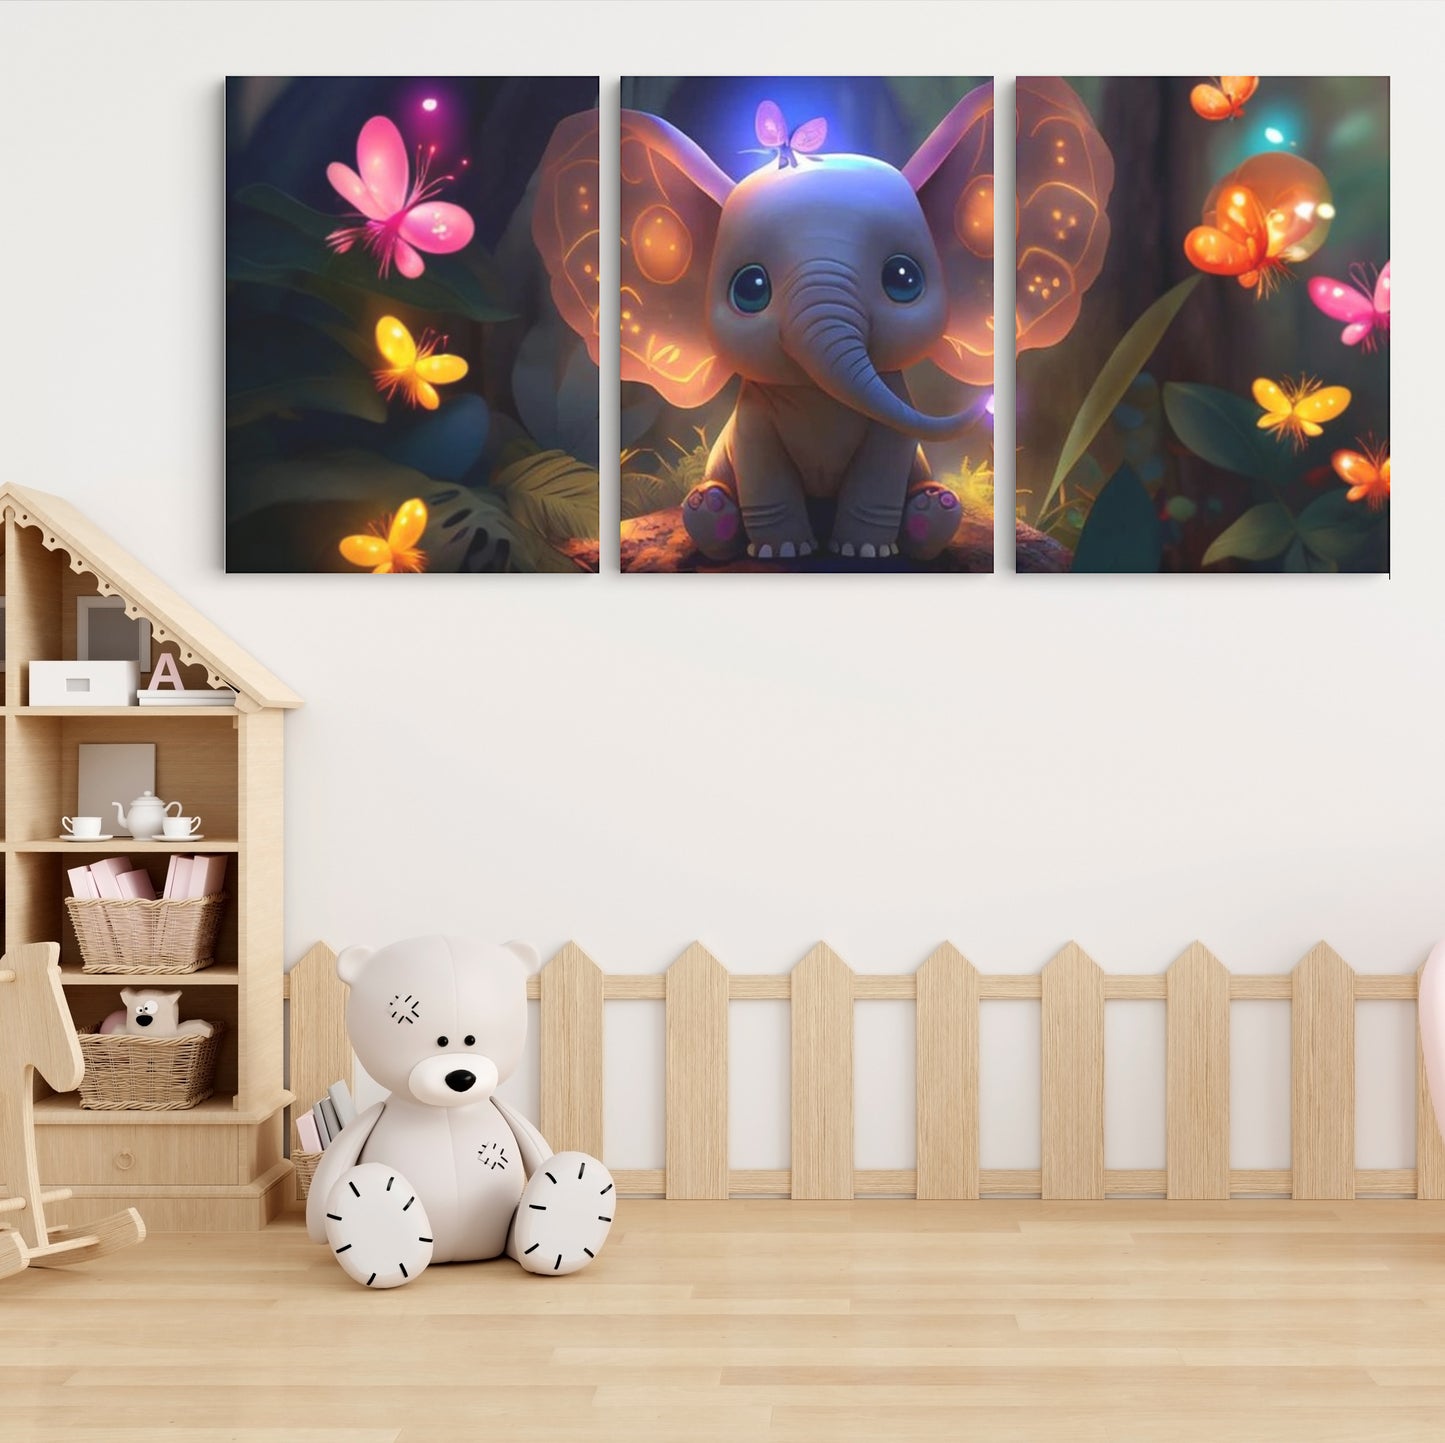 Luminous Harmony: A Wall Art Featuring an AI Elephant Amidst Glowing Butterflies - Celebrate the Fusion of Artificial Intelligence and Natural Splendor - S05E65